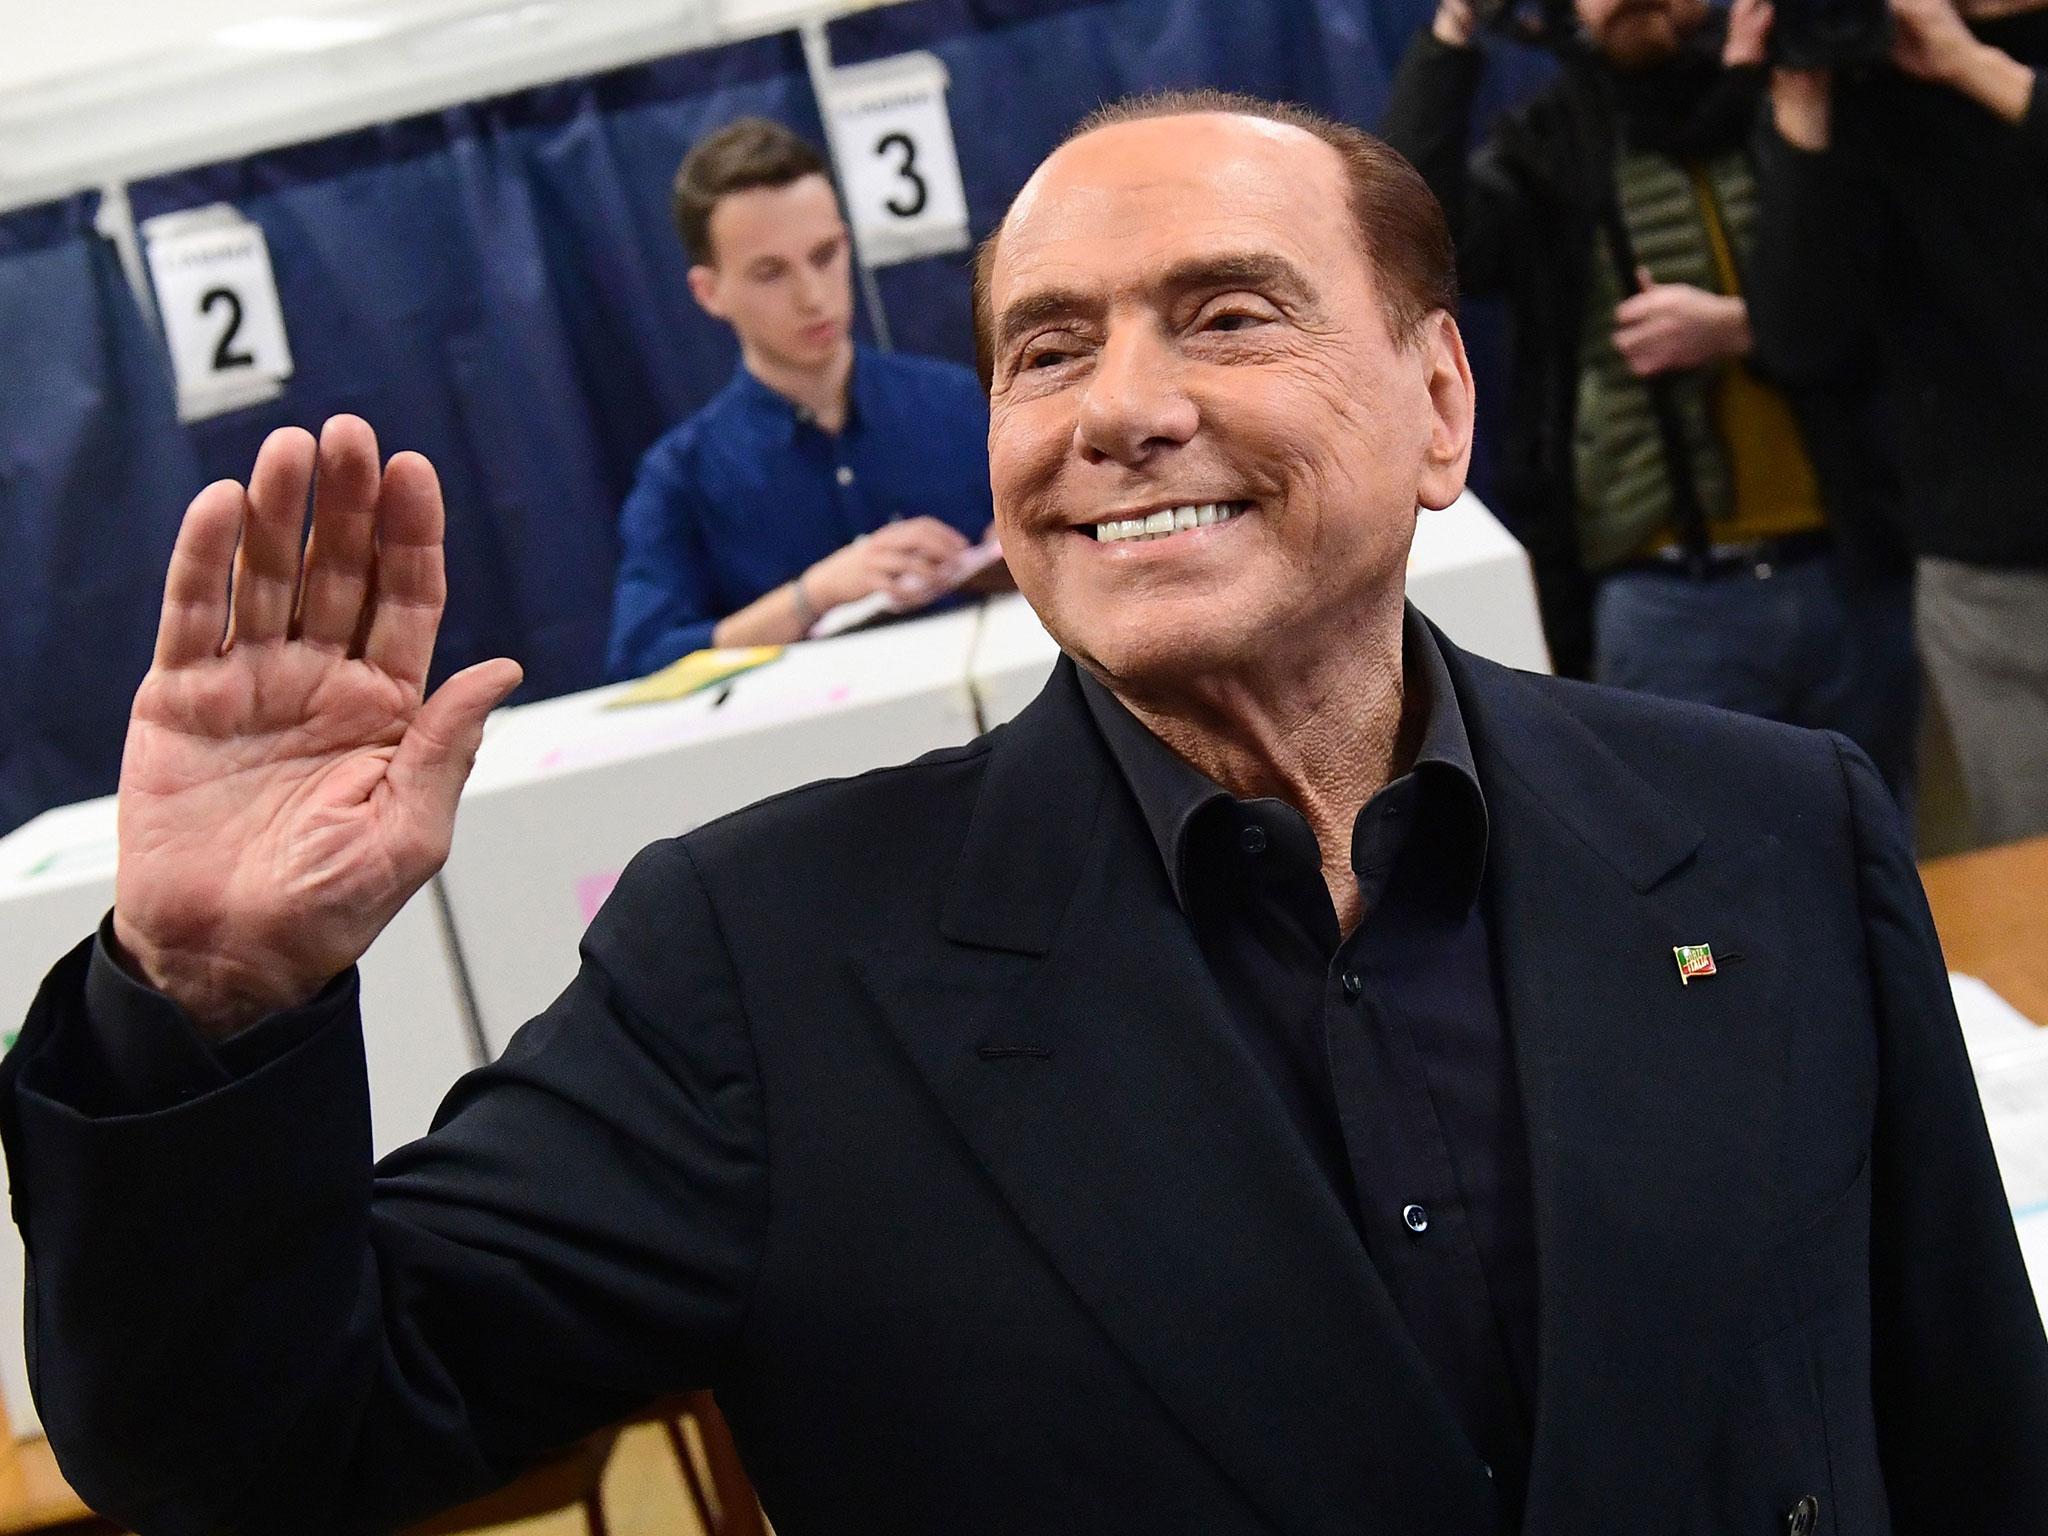 Silvio Berlusconi, leader of the right-wing Forza Italia (Go Italy!) party, is set to play a leading role in the aftermath of the country's uncertain election